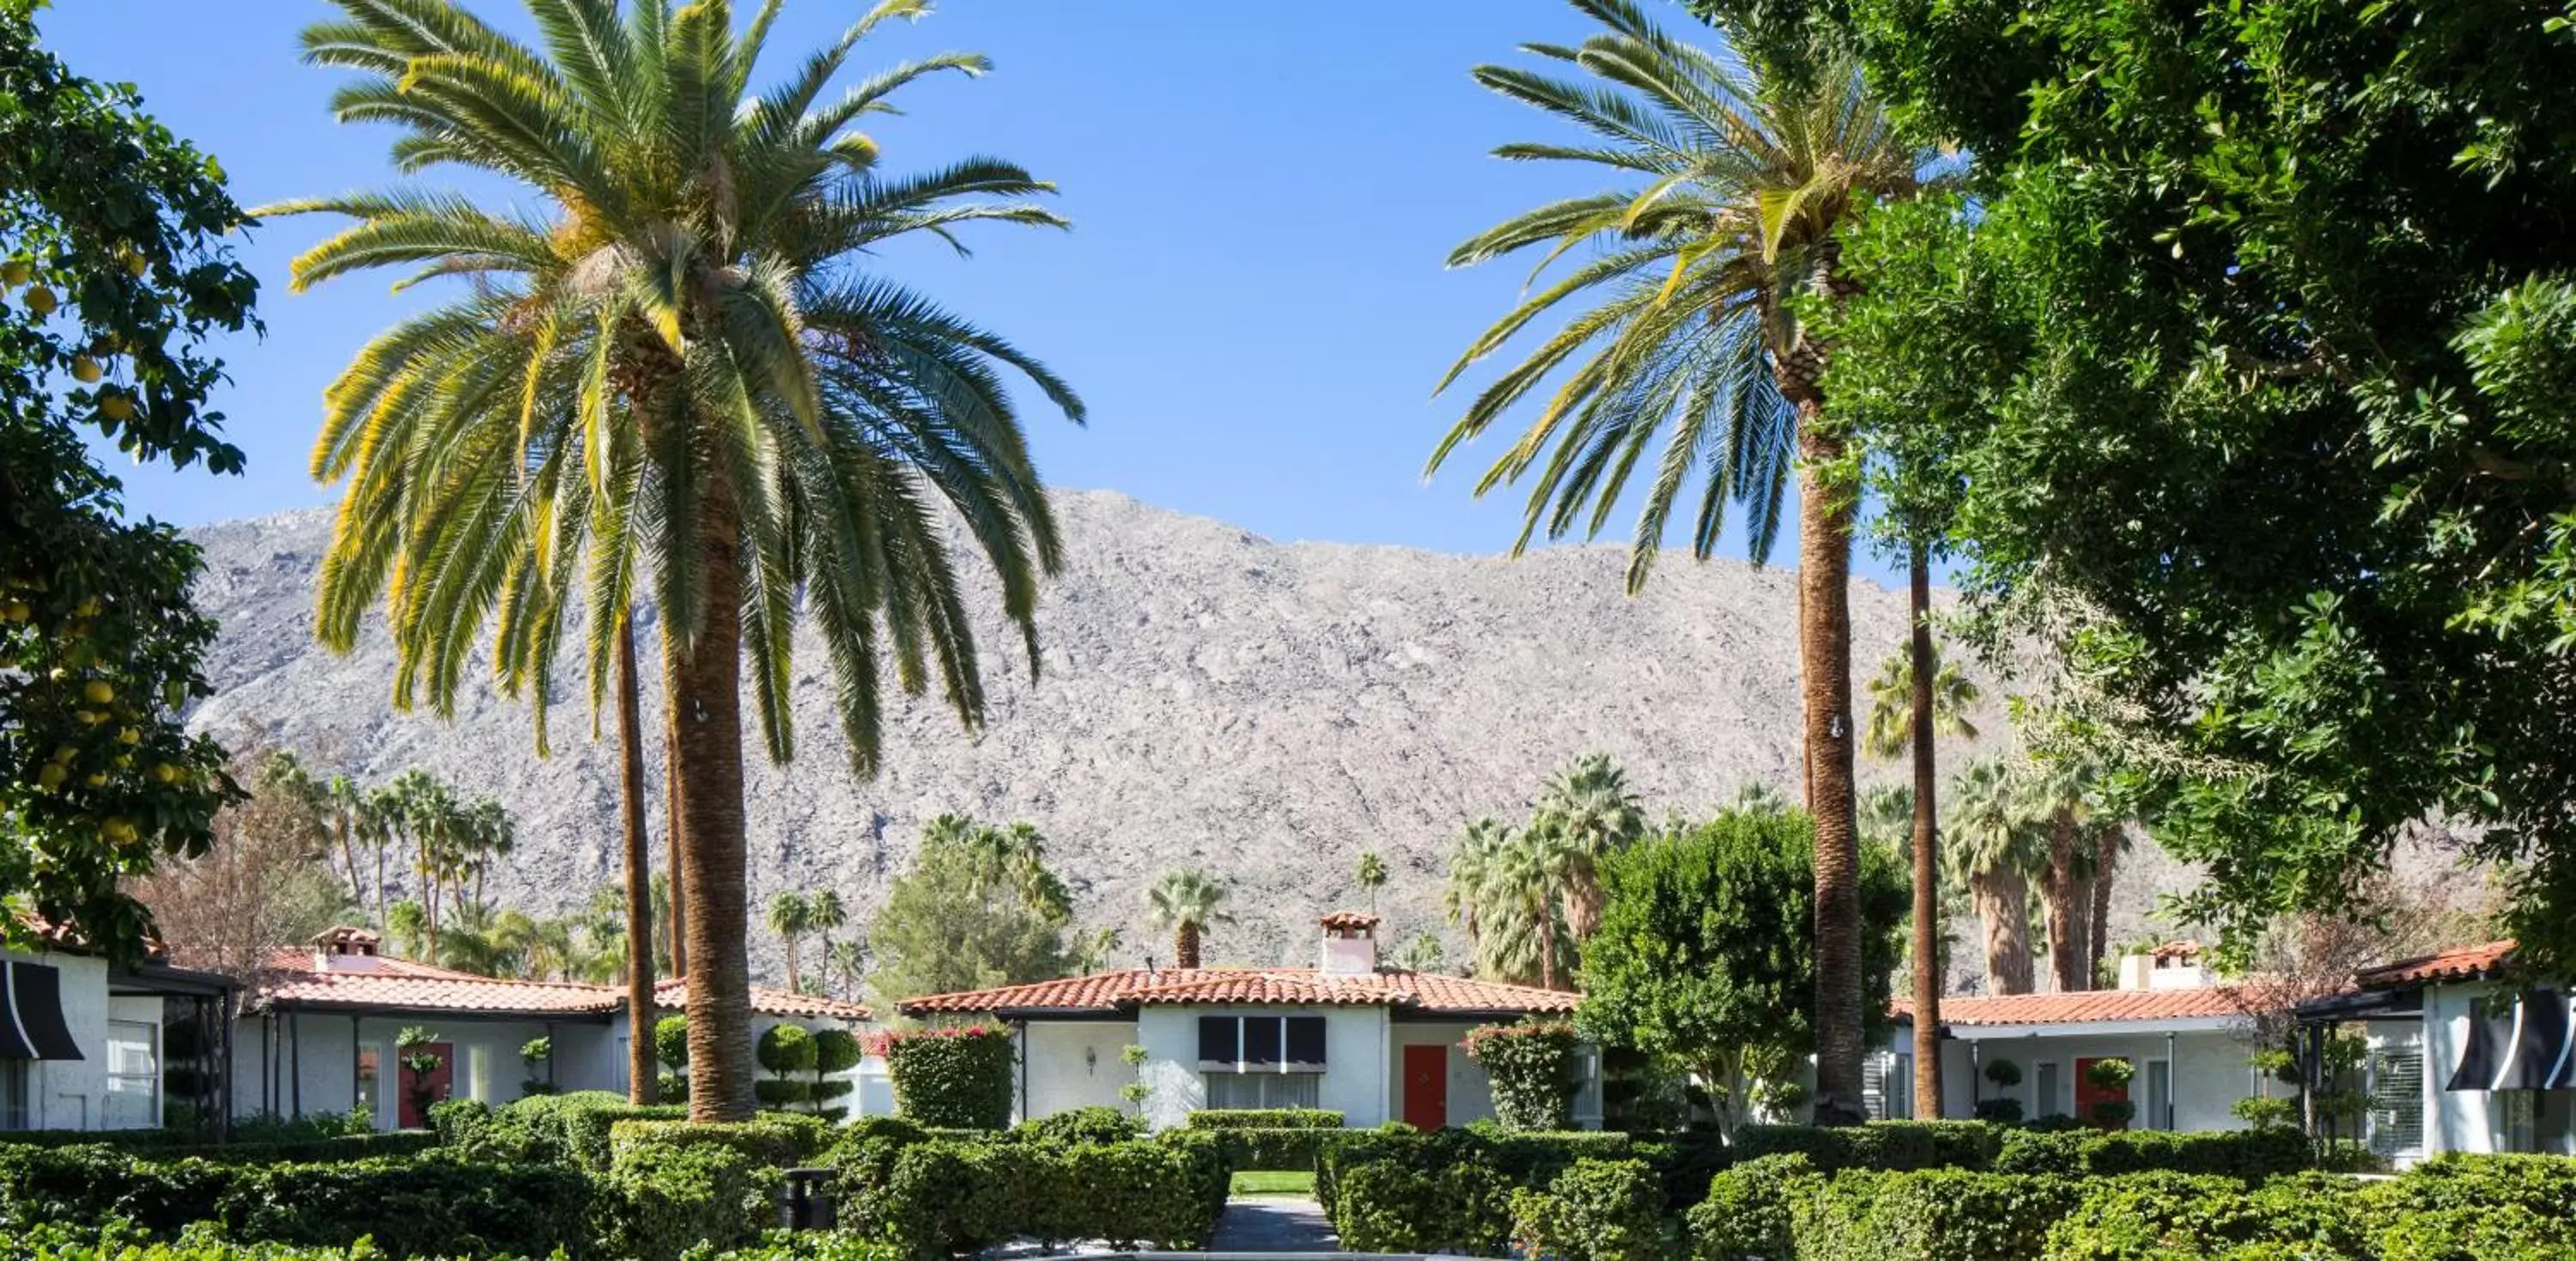 Facade/entrance in Avalon Hotel and Bungalows Palm Springs